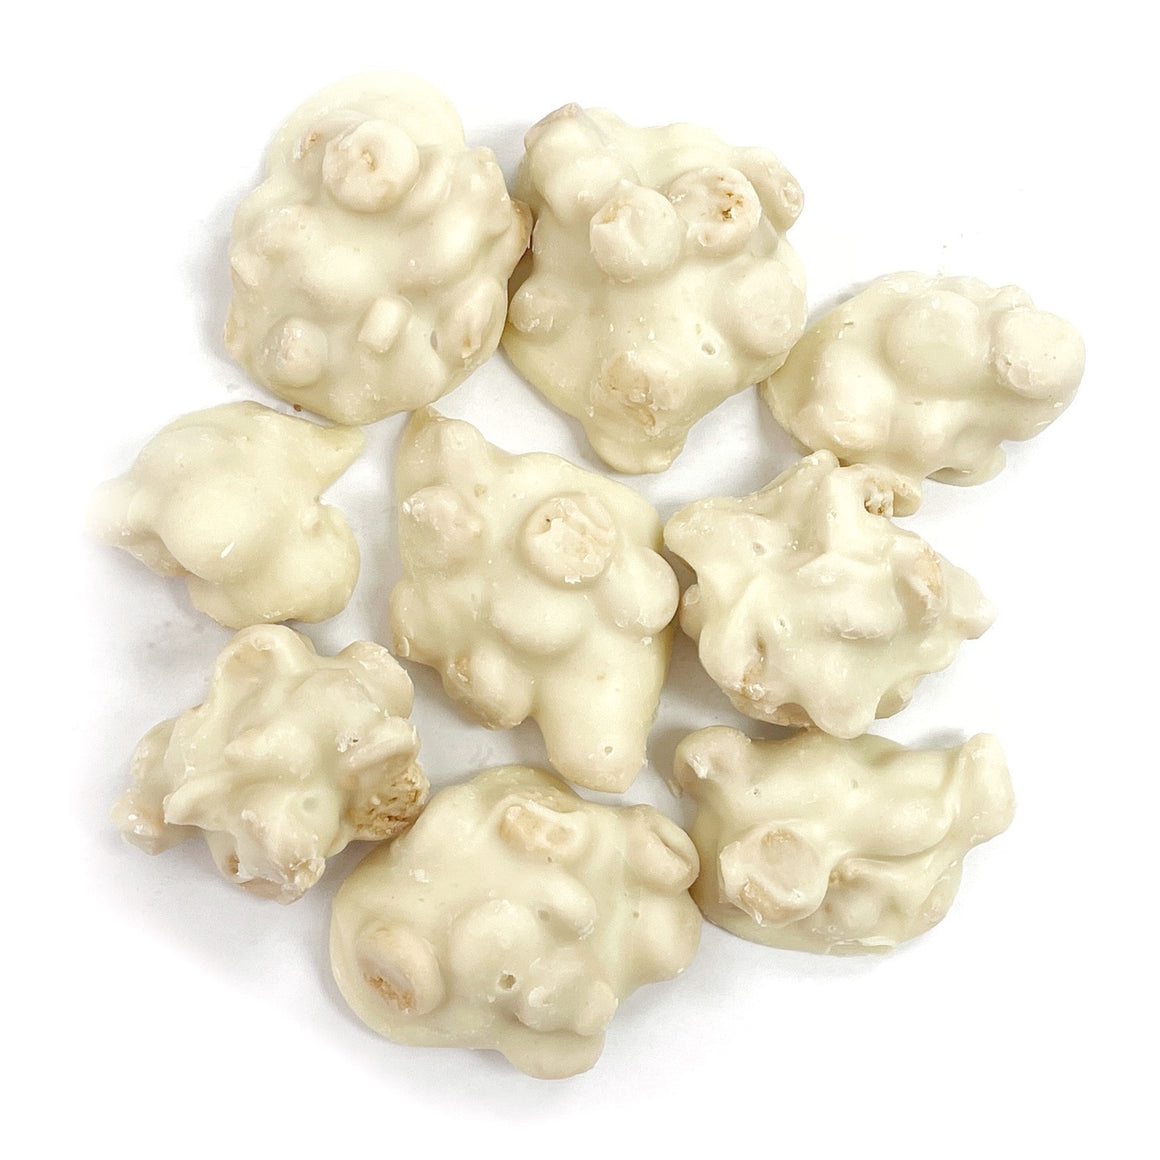 White Chocolate Cookies and Fudge Cluster